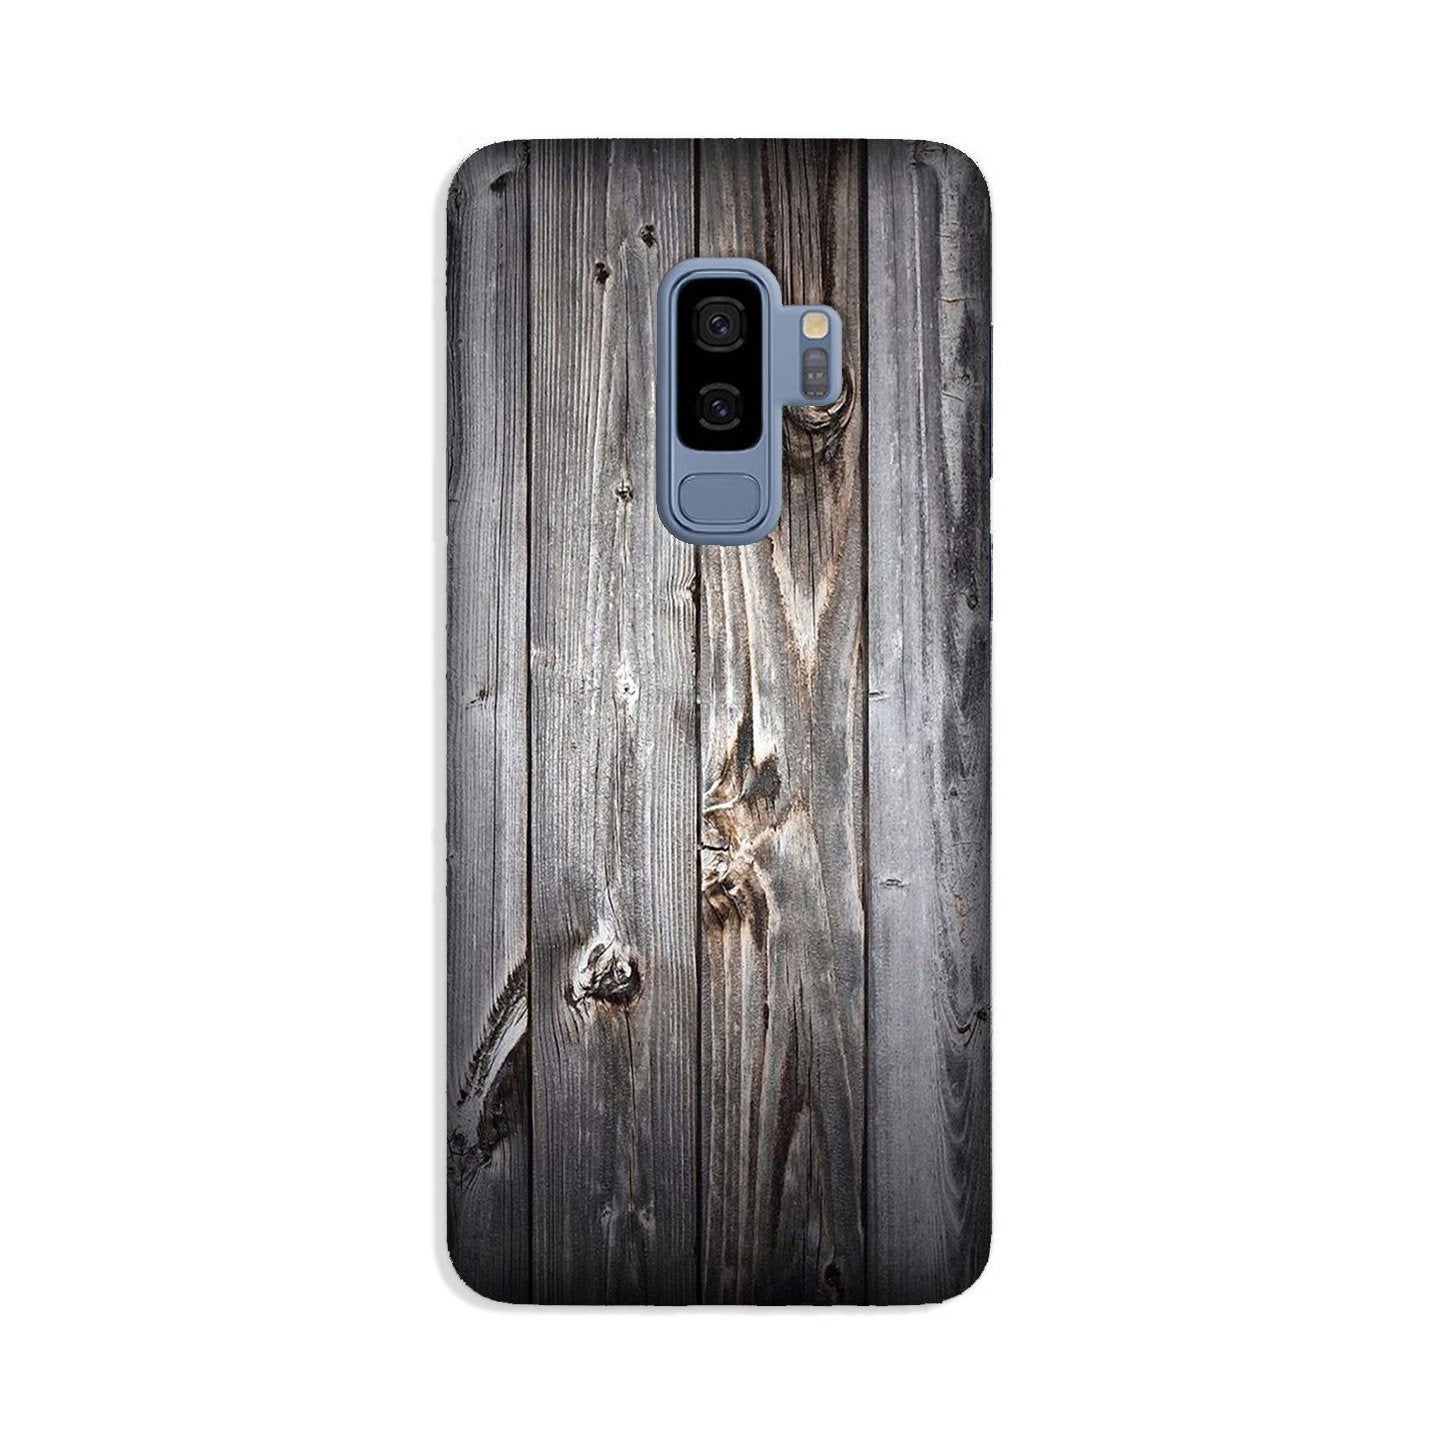 Wooden Look Case for Galaxy S9 Plus  (Design - 114)